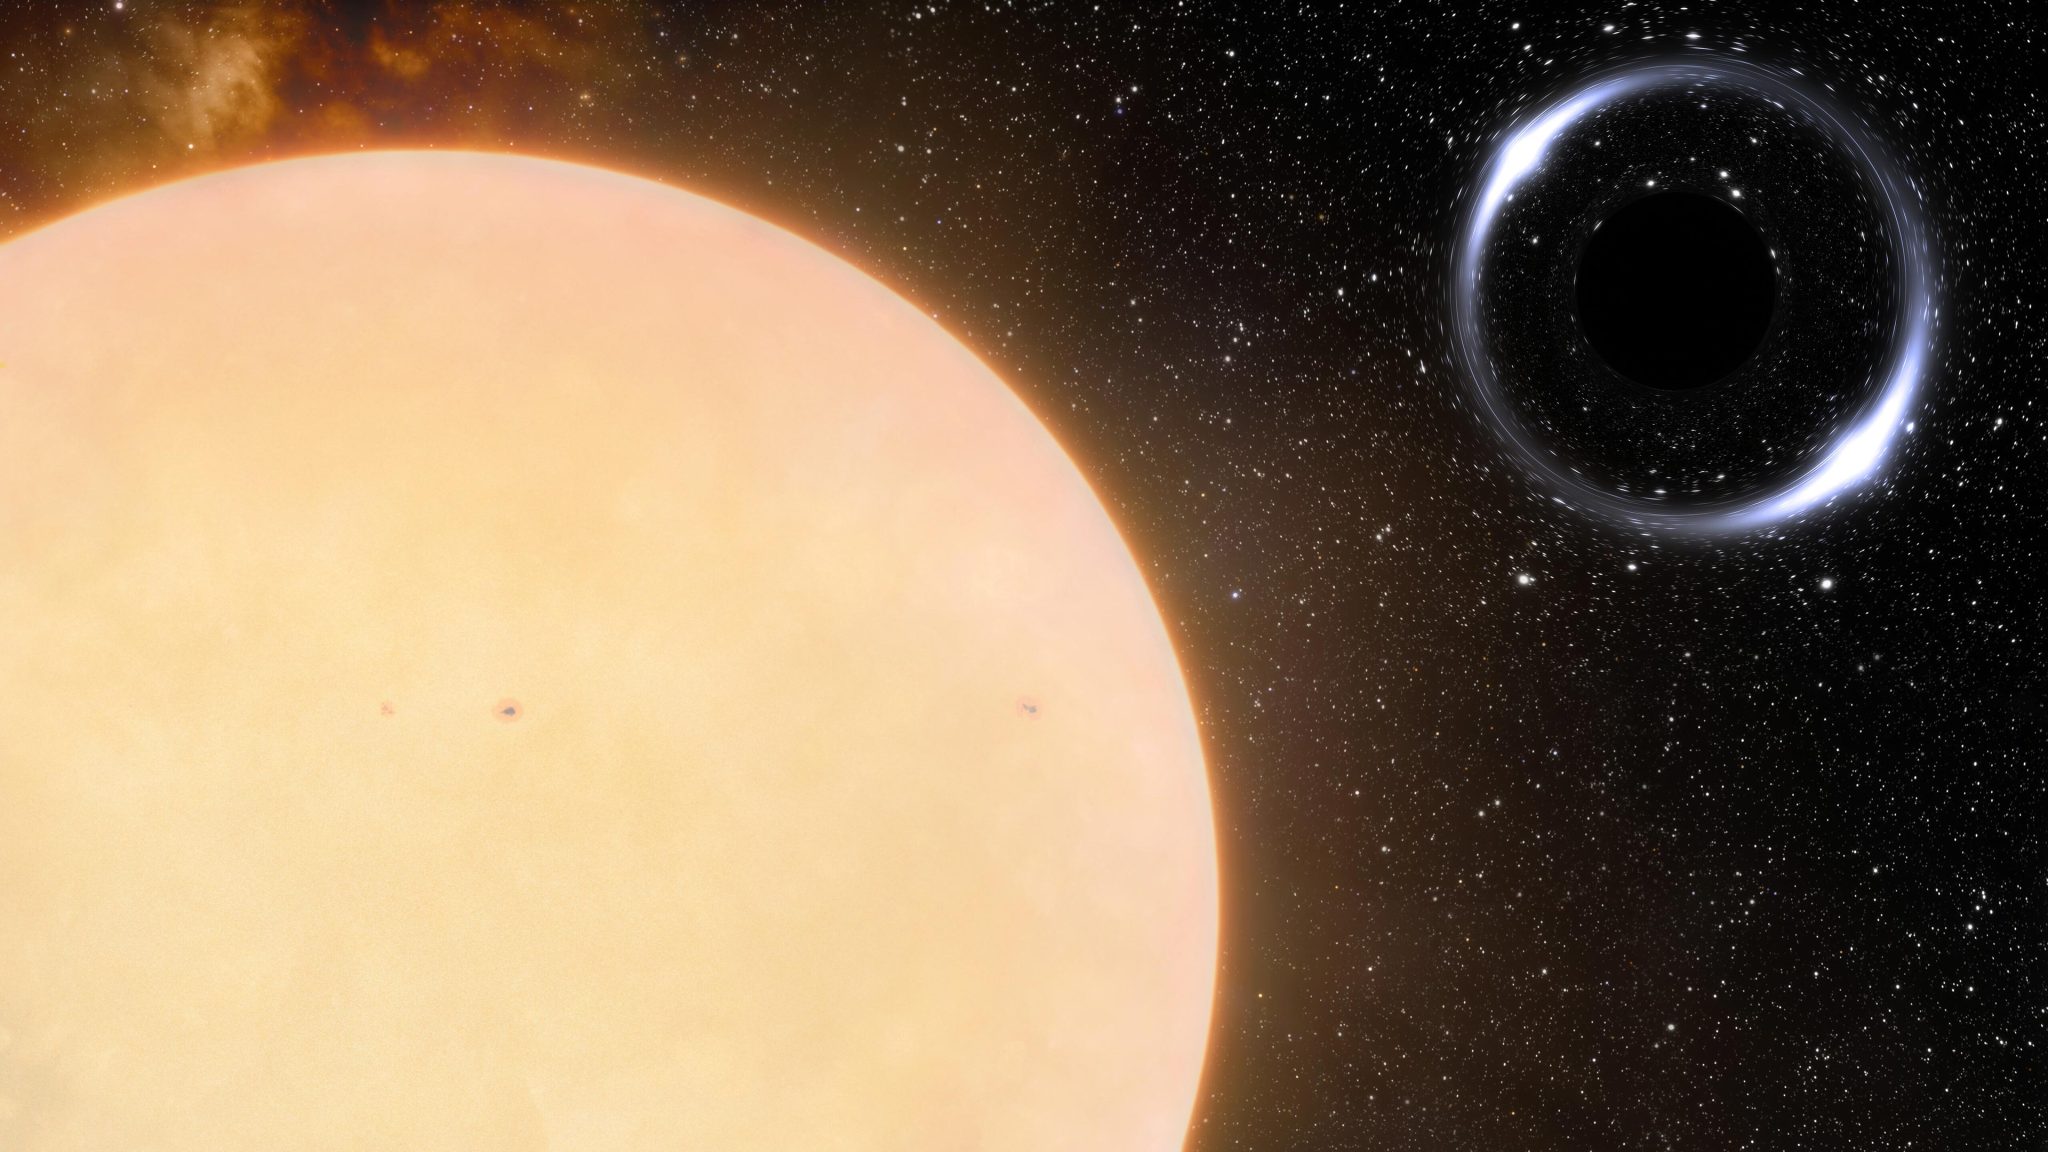 Artist's rendering of the closest black hole and its sun-like companion star